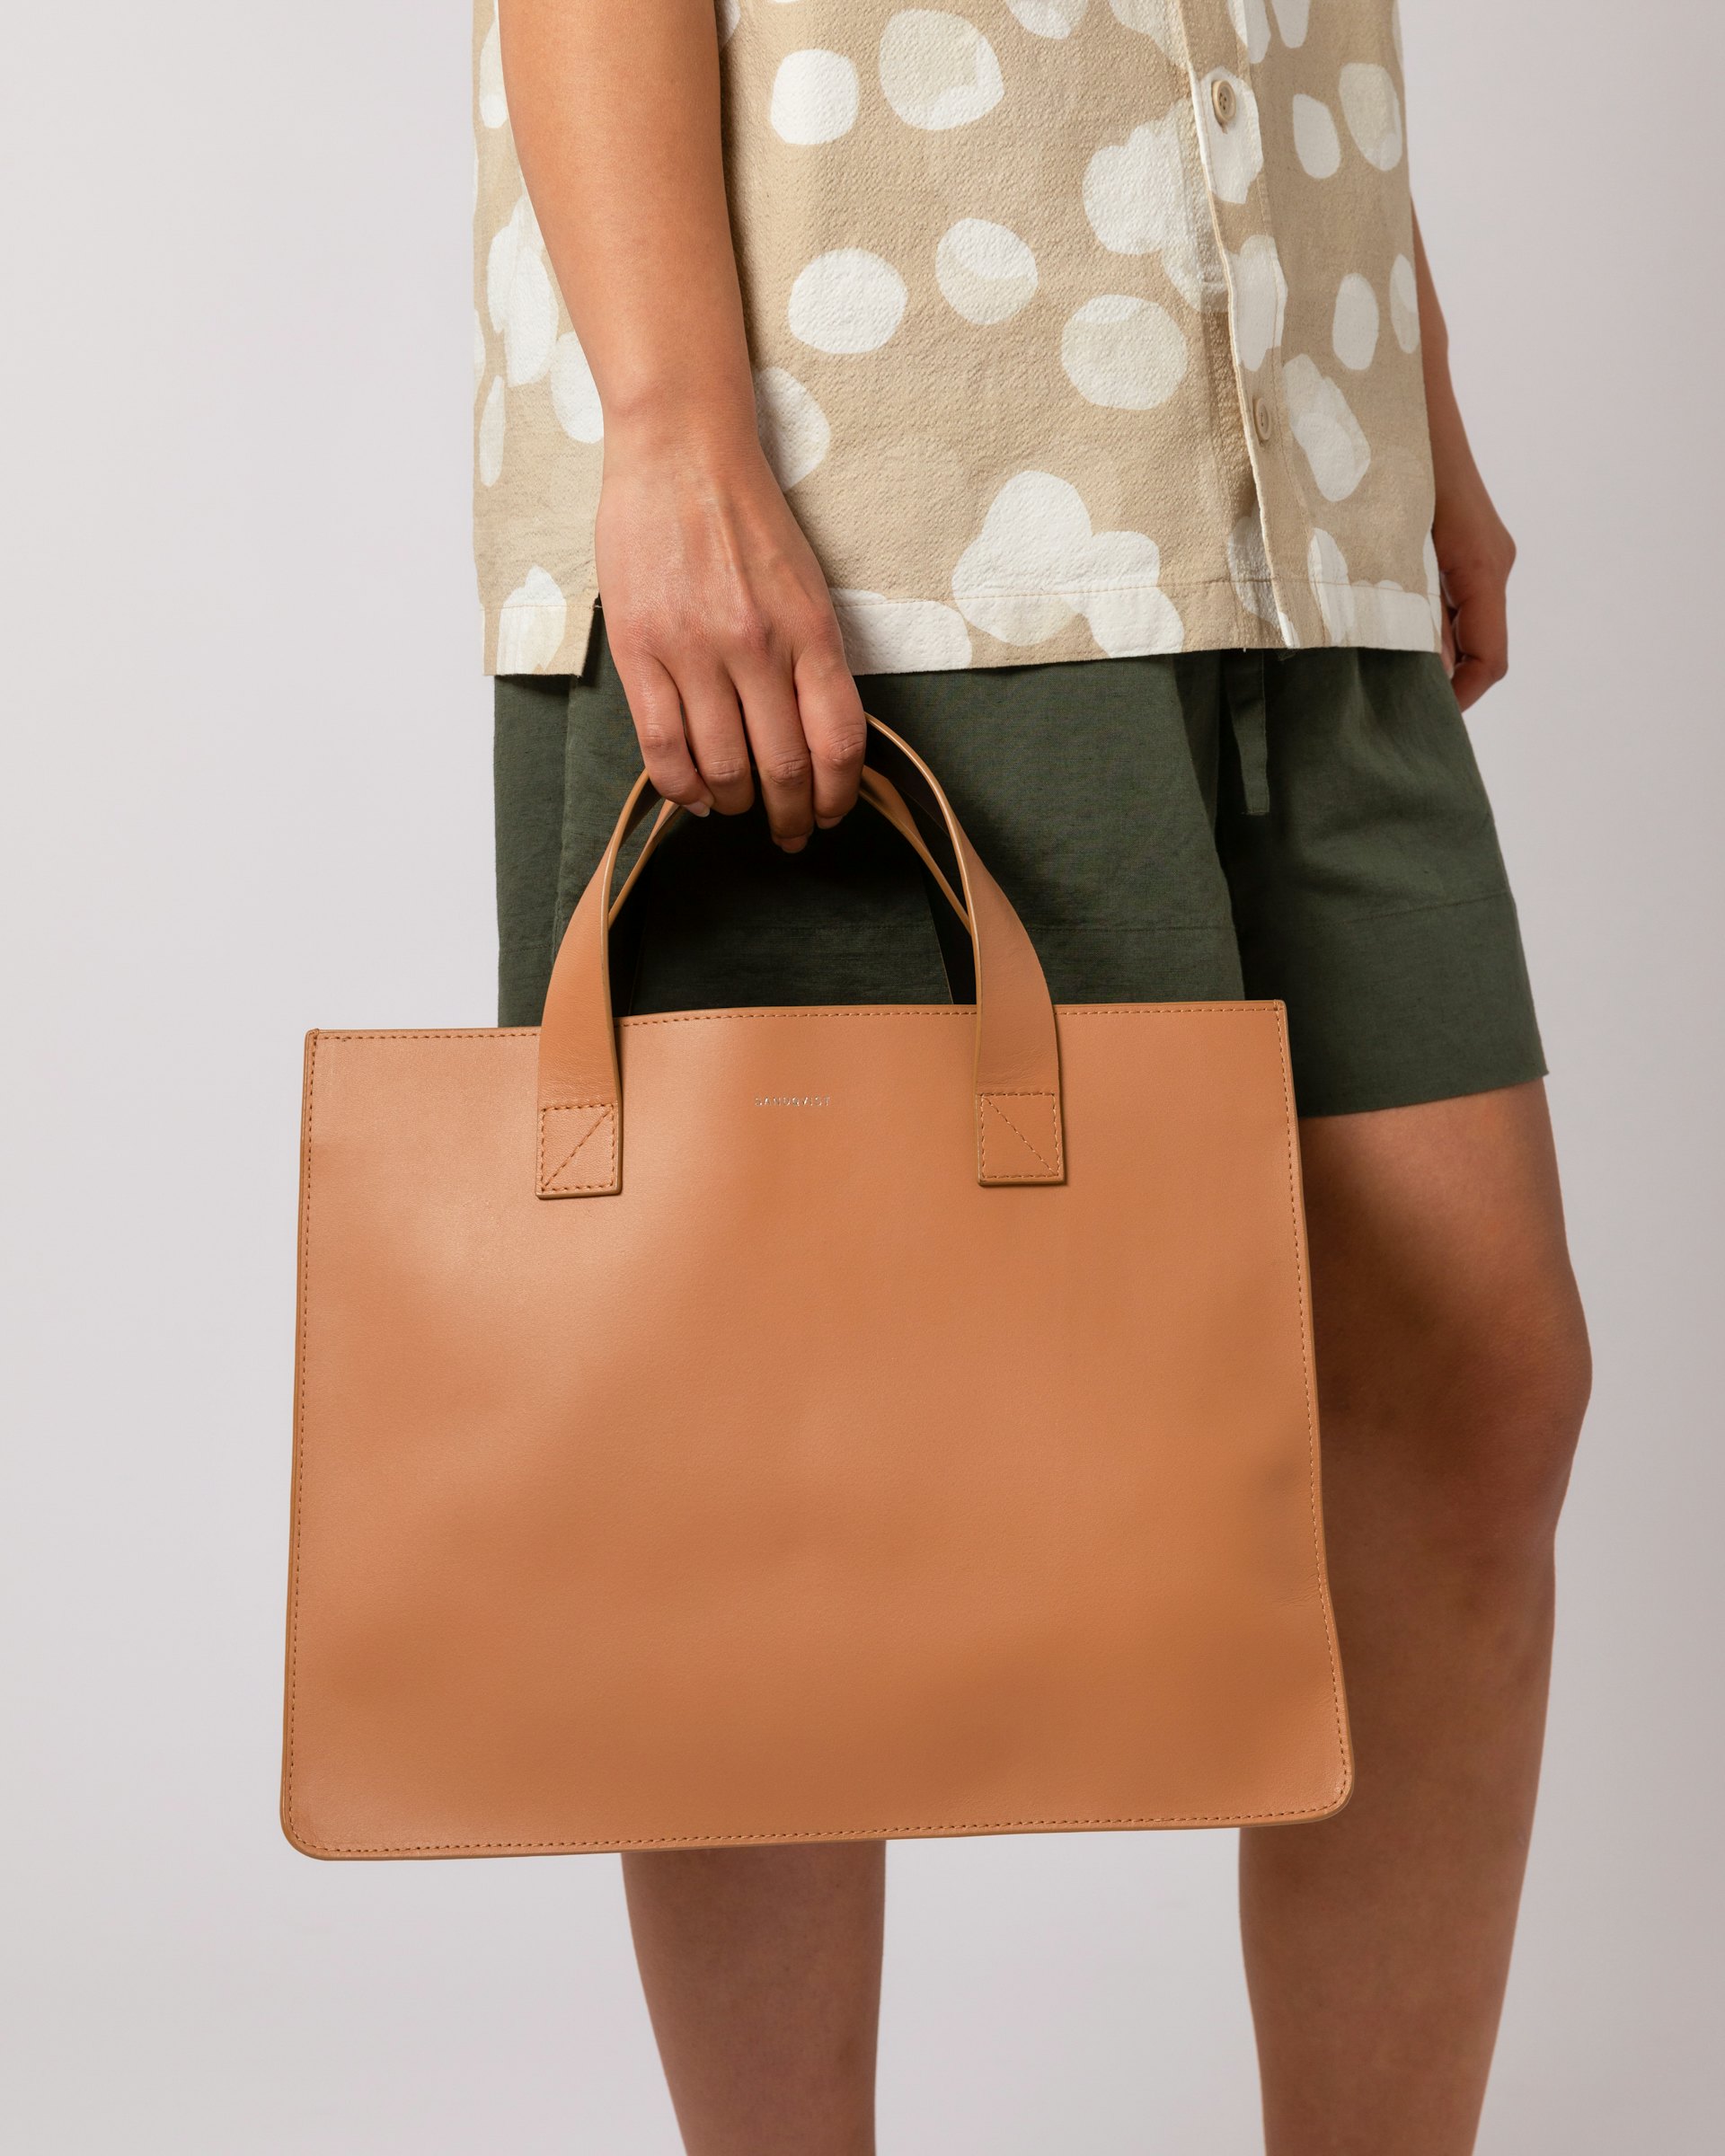 Edie belongs to the category Tote bags and is in color toffee (7 of 7)